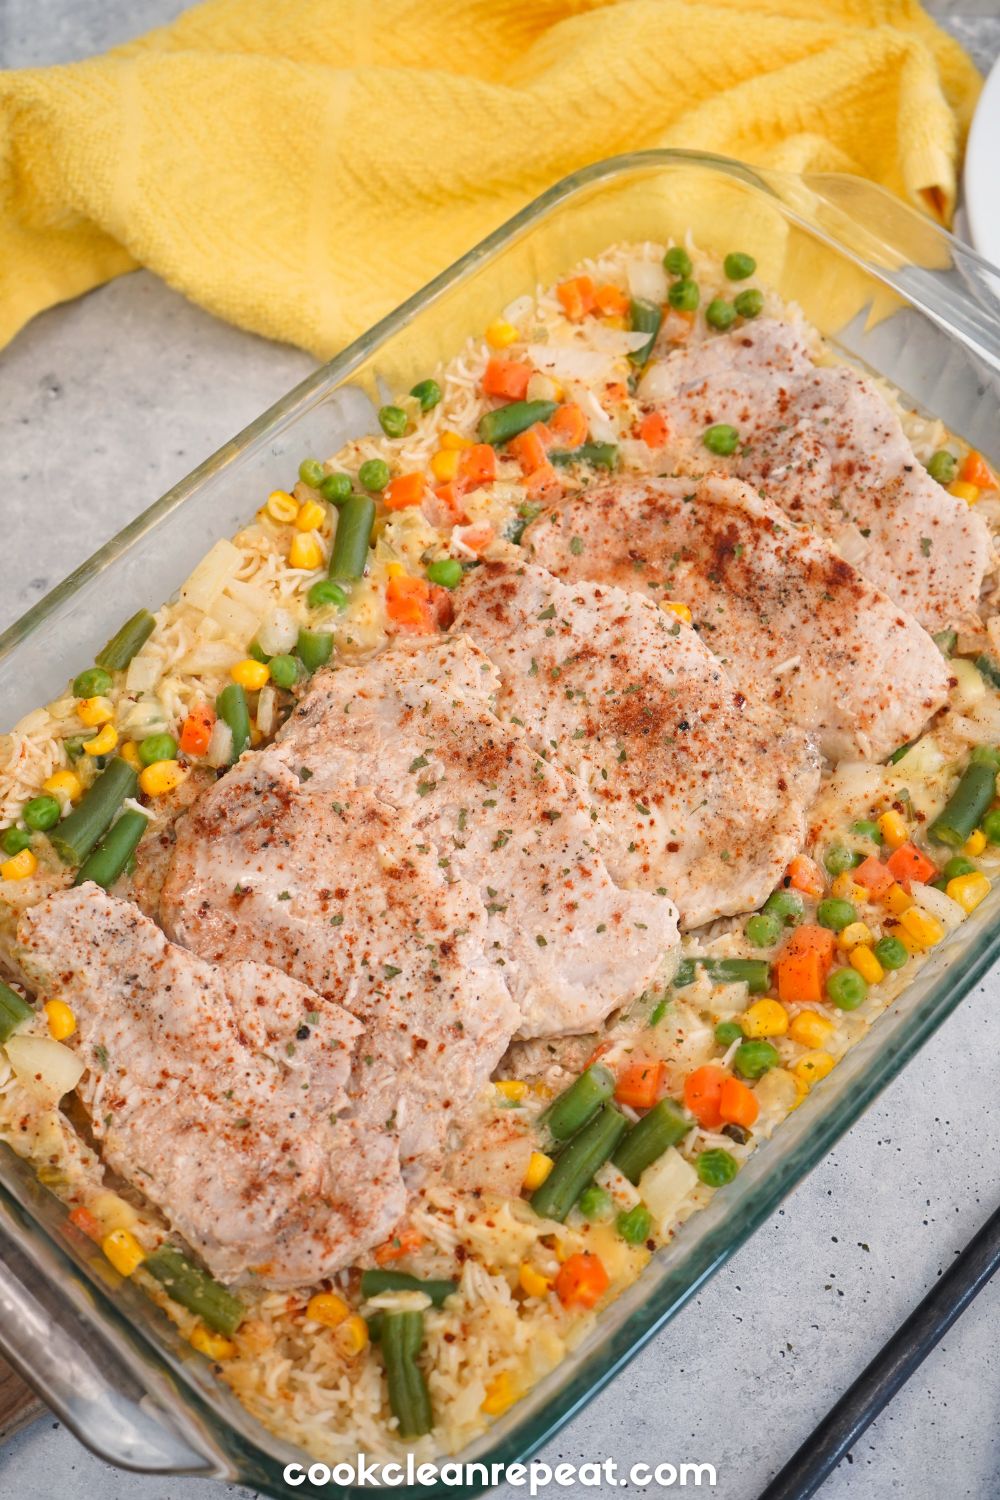 pork chops and vegetables in a clear baking dish